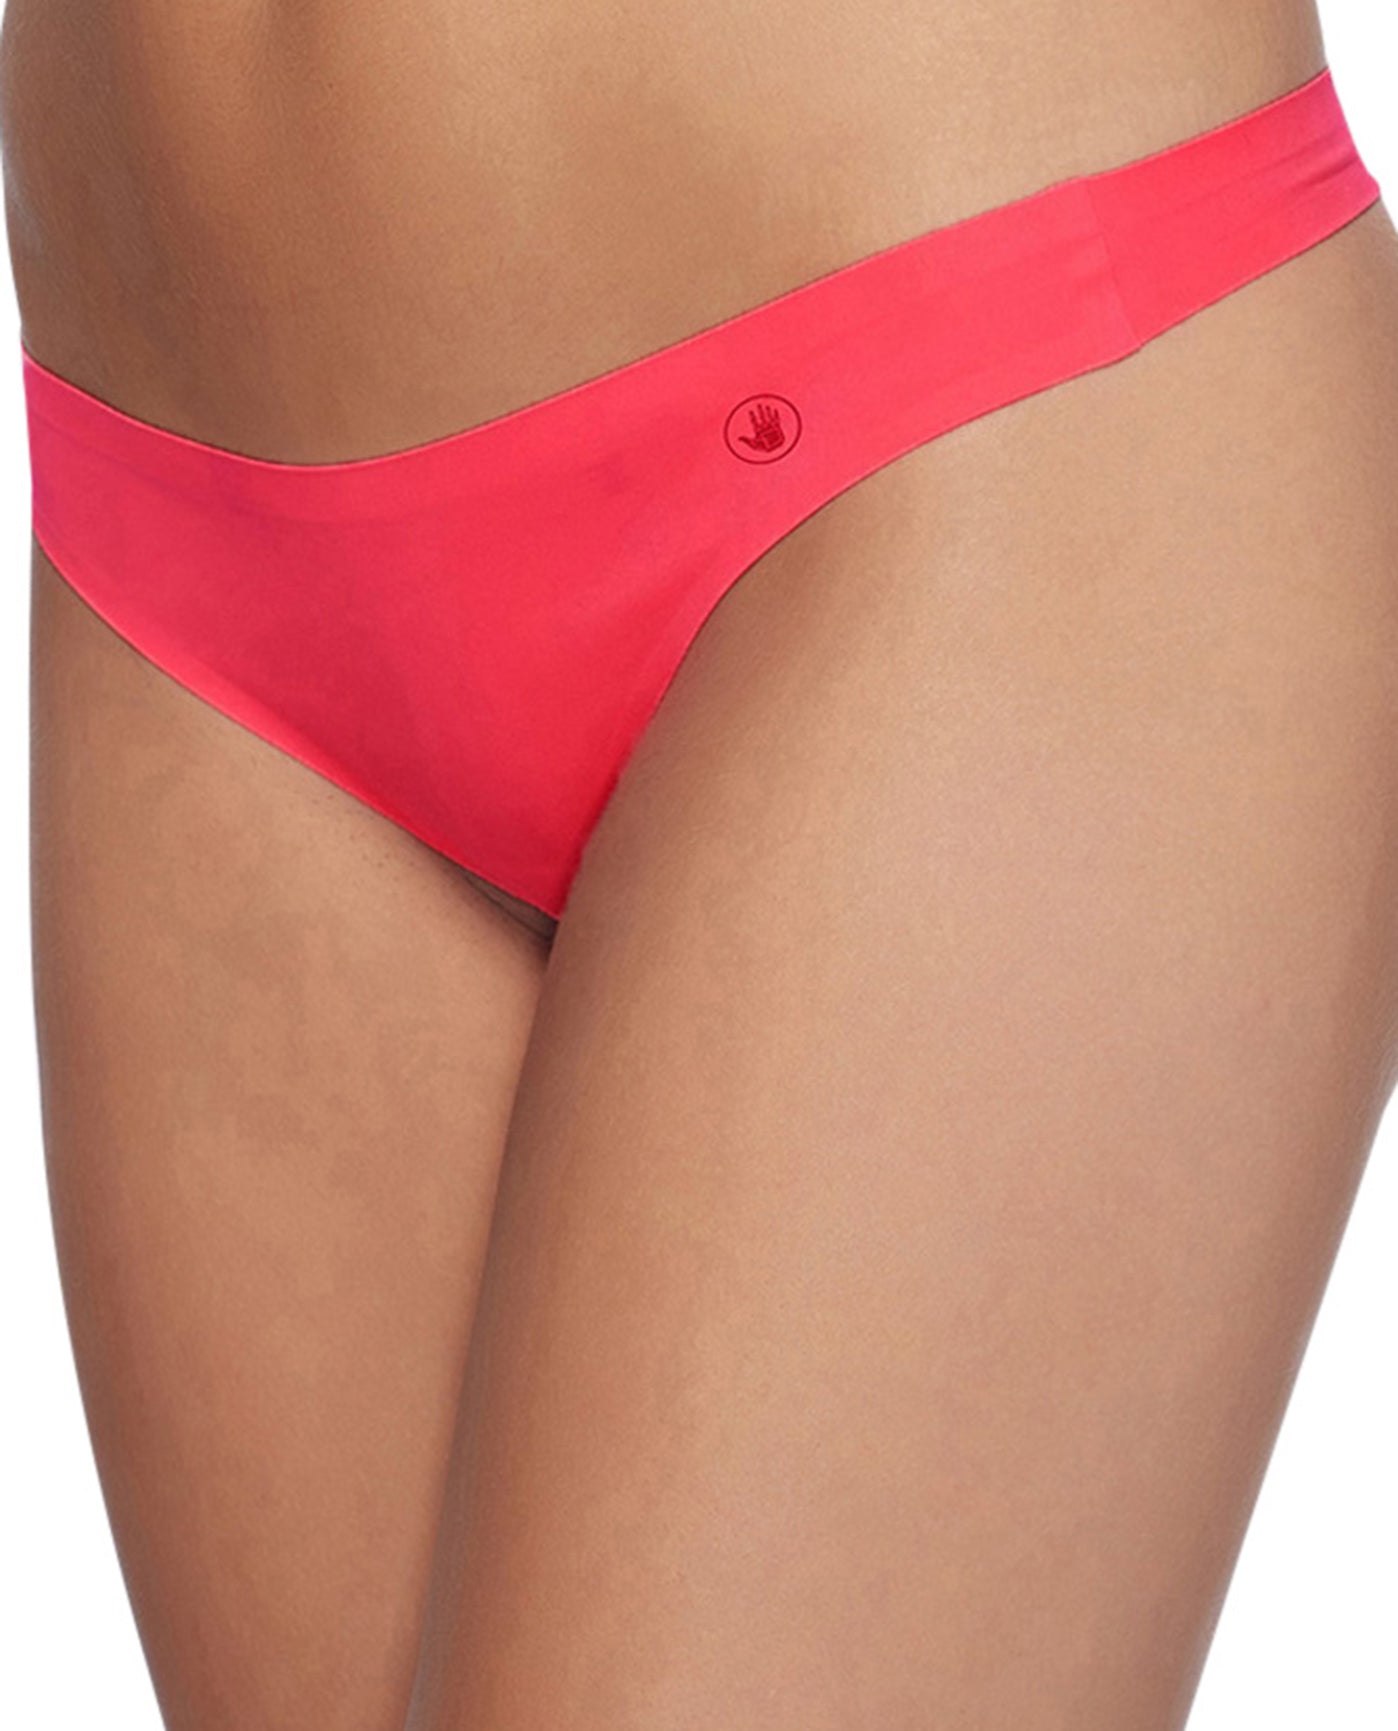 Back View Of Body Glove Sport Seamless Thong Panty | BGS Diva